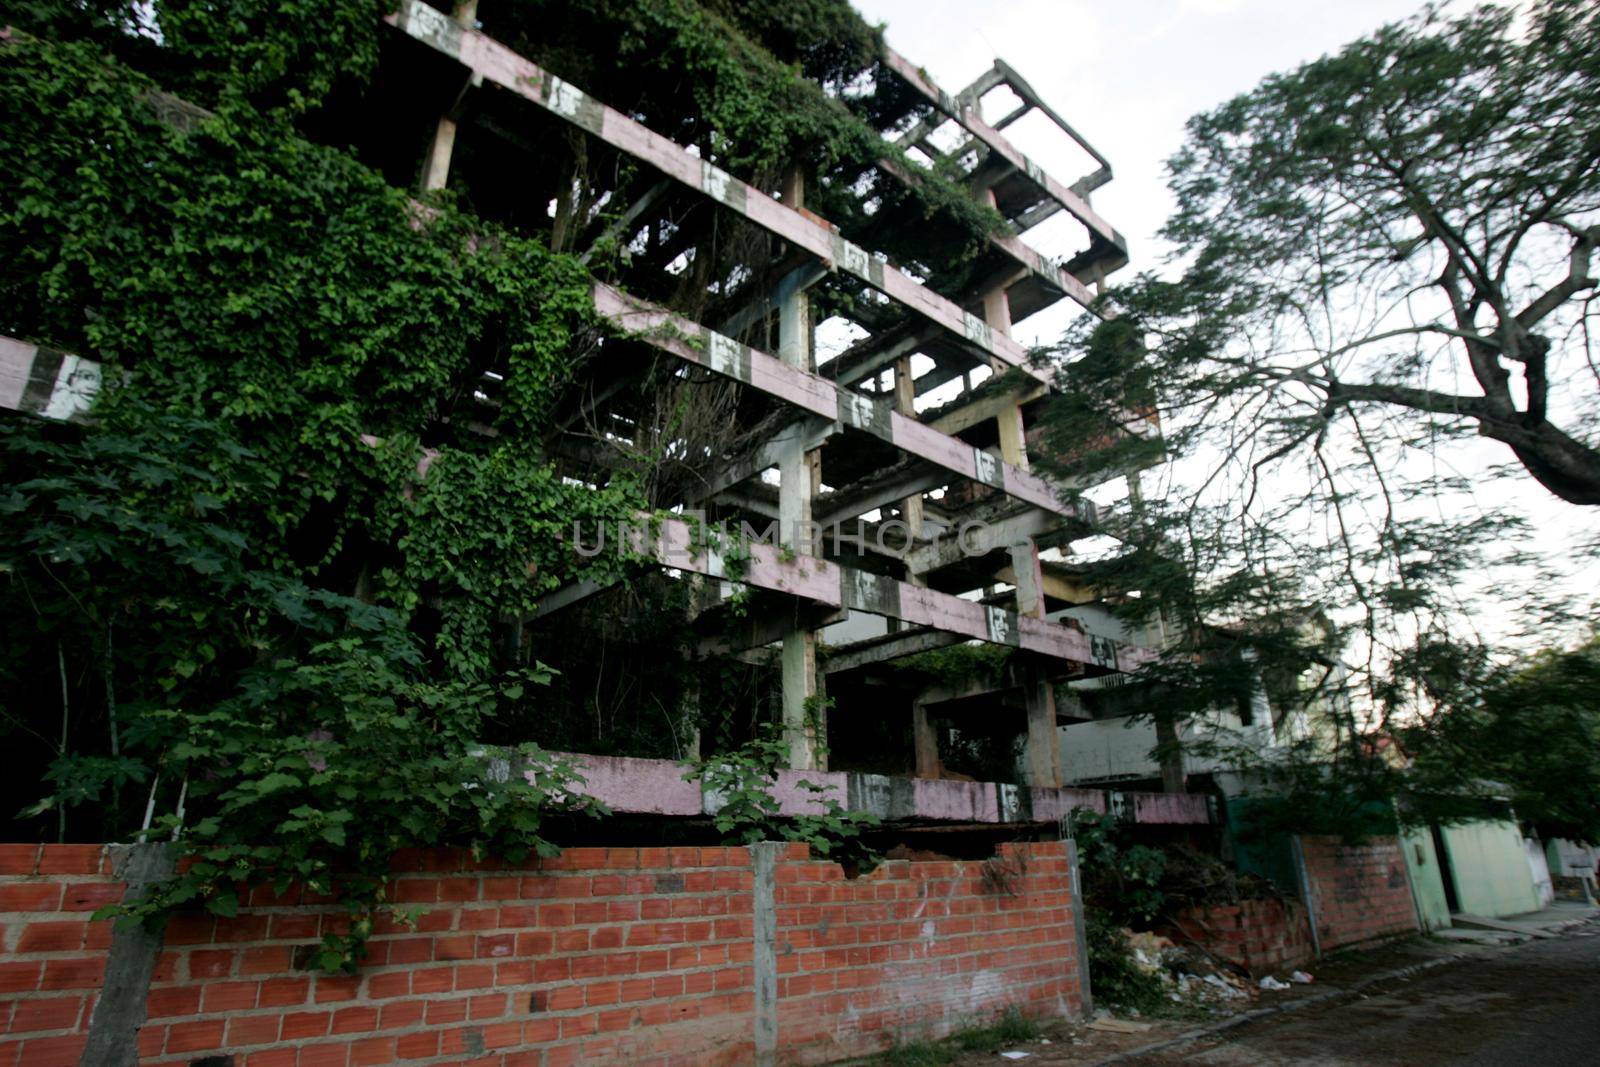 salvador, bahia / brazil - may 1, 2013: vegetation is seen in abandoned building construction in the neighborhood of Rio Vermelho in the city of Salvador.

